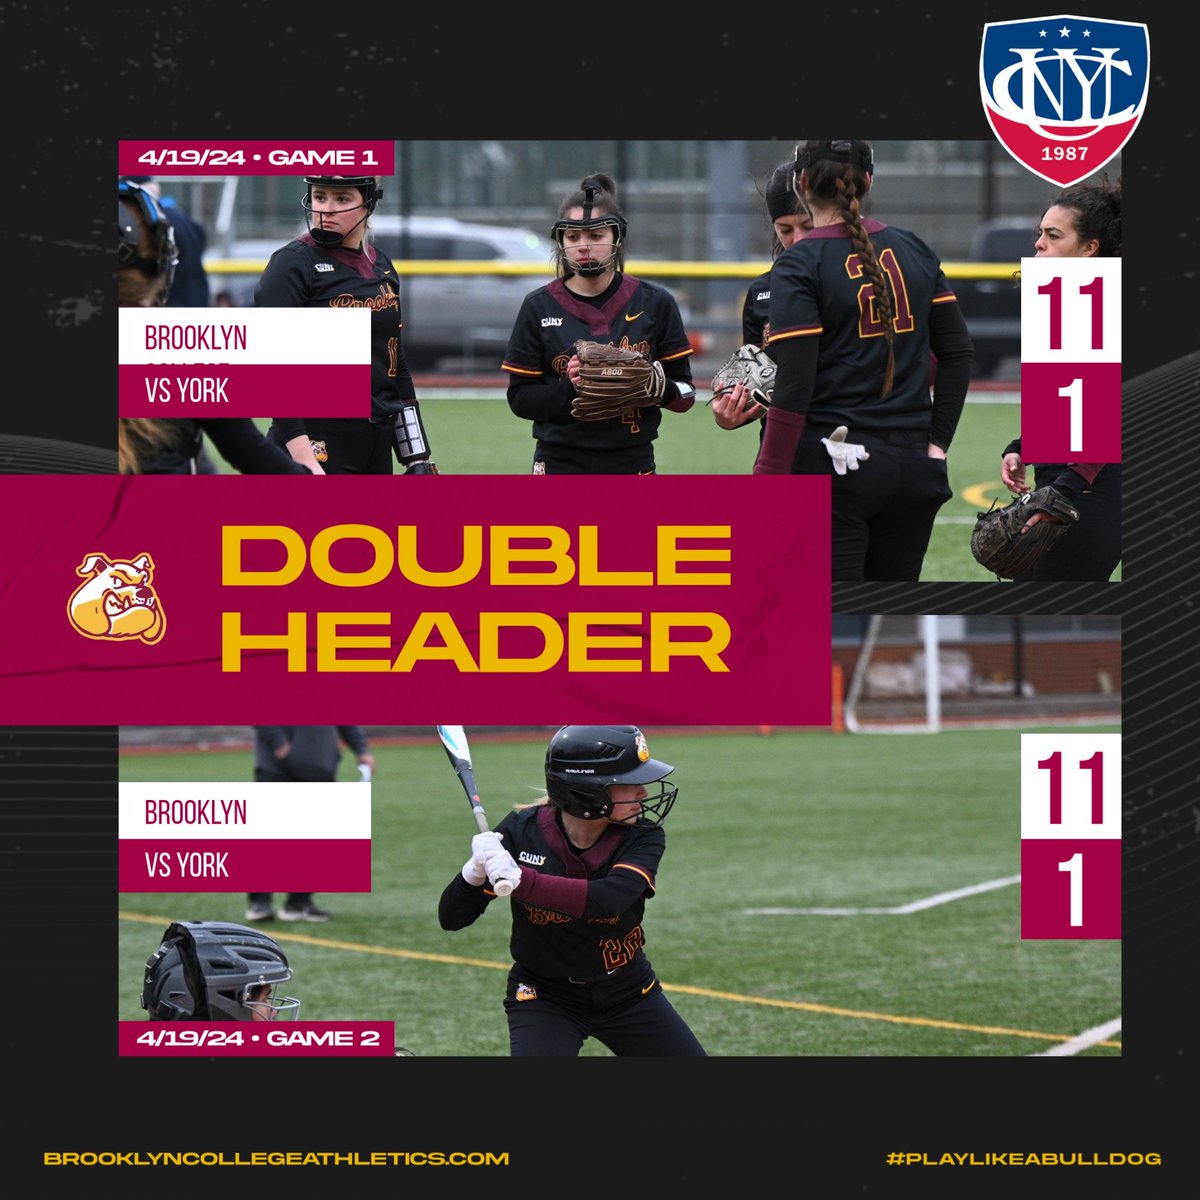 Bulldogs WIN ❌ ✌️!

#BCsb takes two on the road for first @cunyac victories! 🐶🥎

#PlayLikeaBulldog #cunysb #d3sb #TheCityPlaysHere